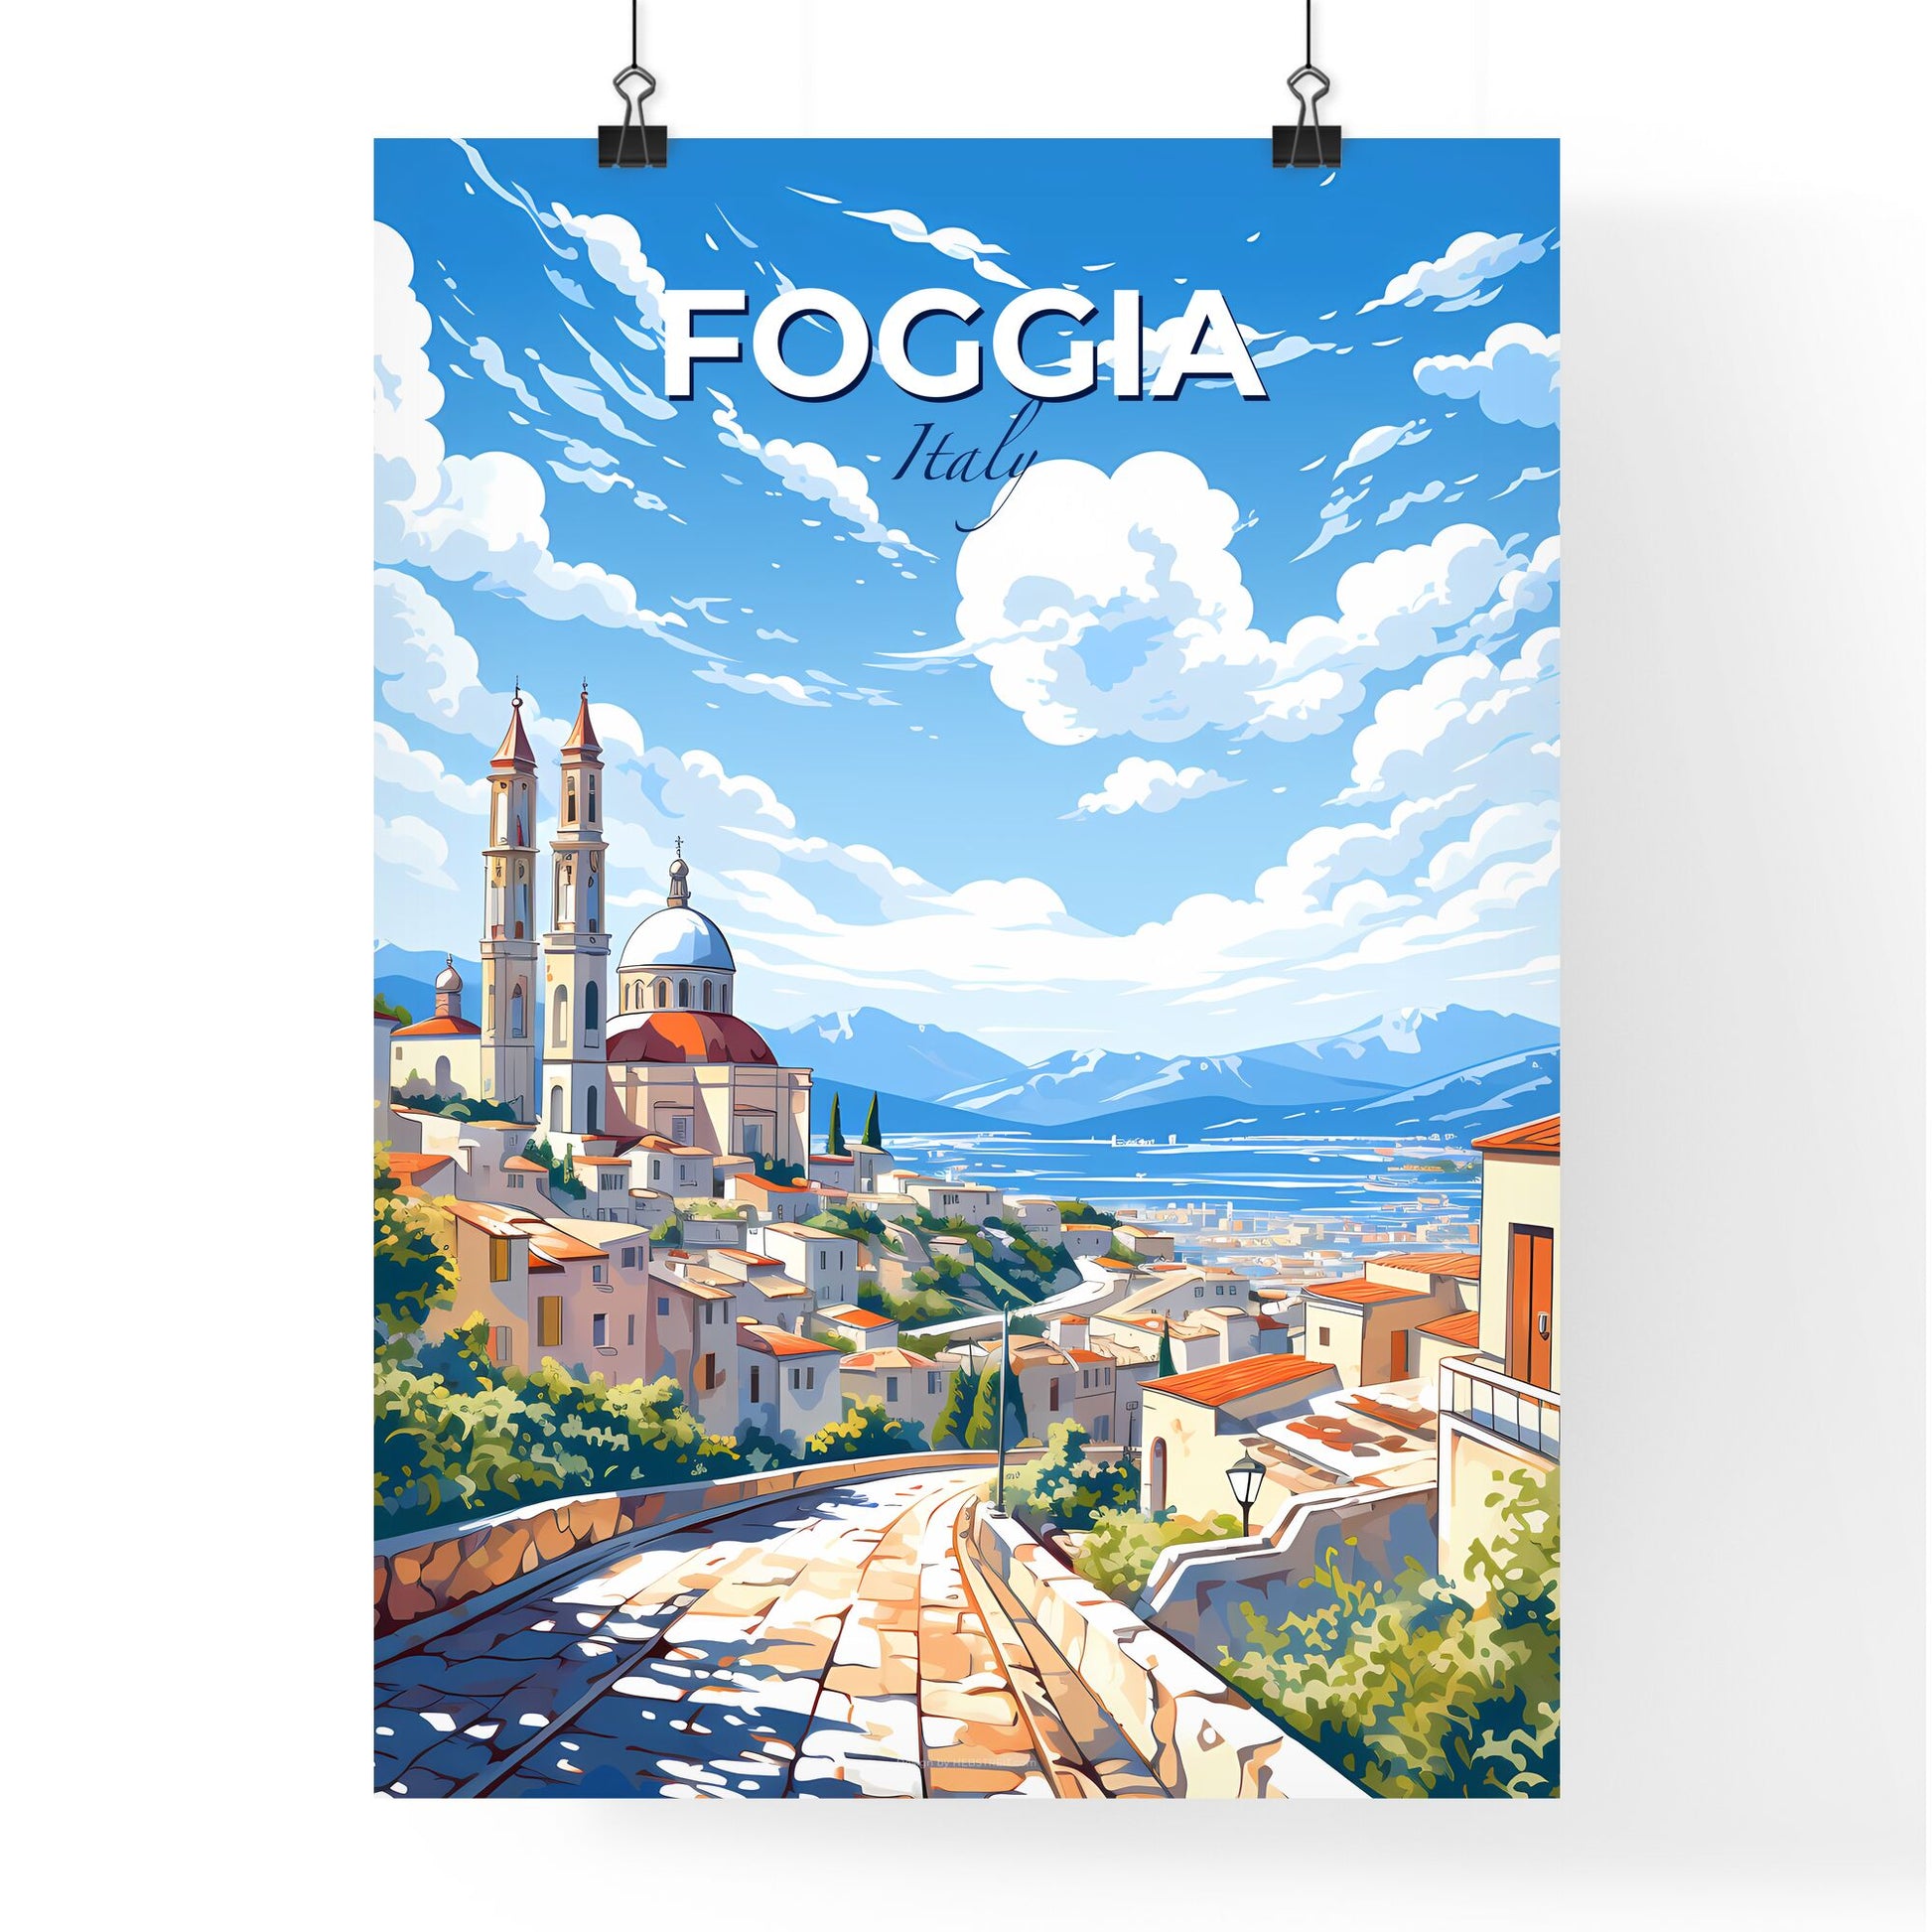 Foggia, Italy, A Poster of a road leading to a town Default Title